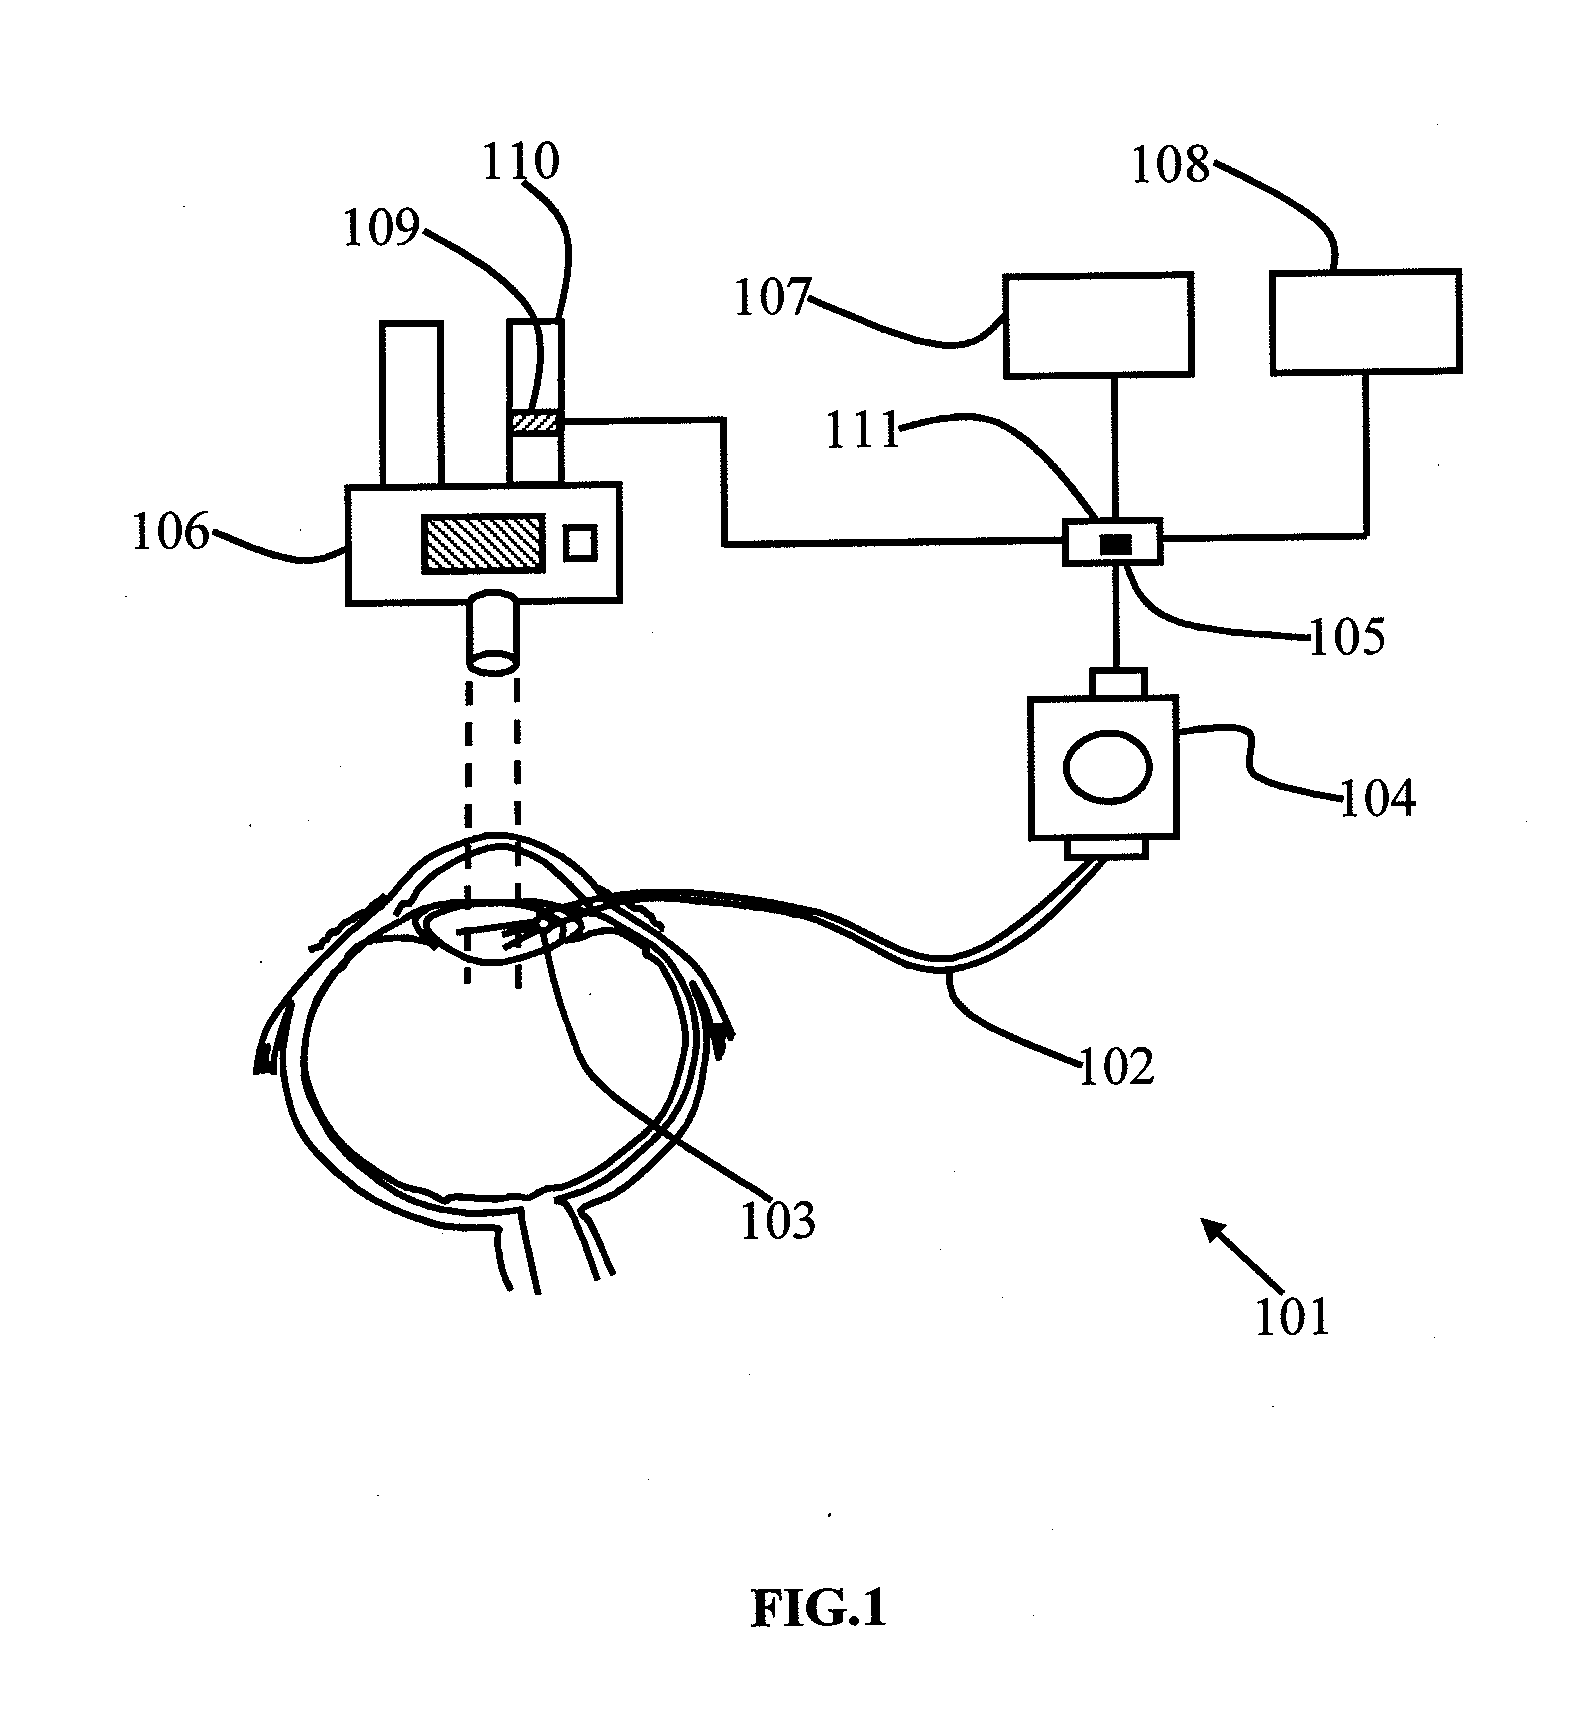 Integrated fiber optic ophthalmic intraocular surgical device with camera